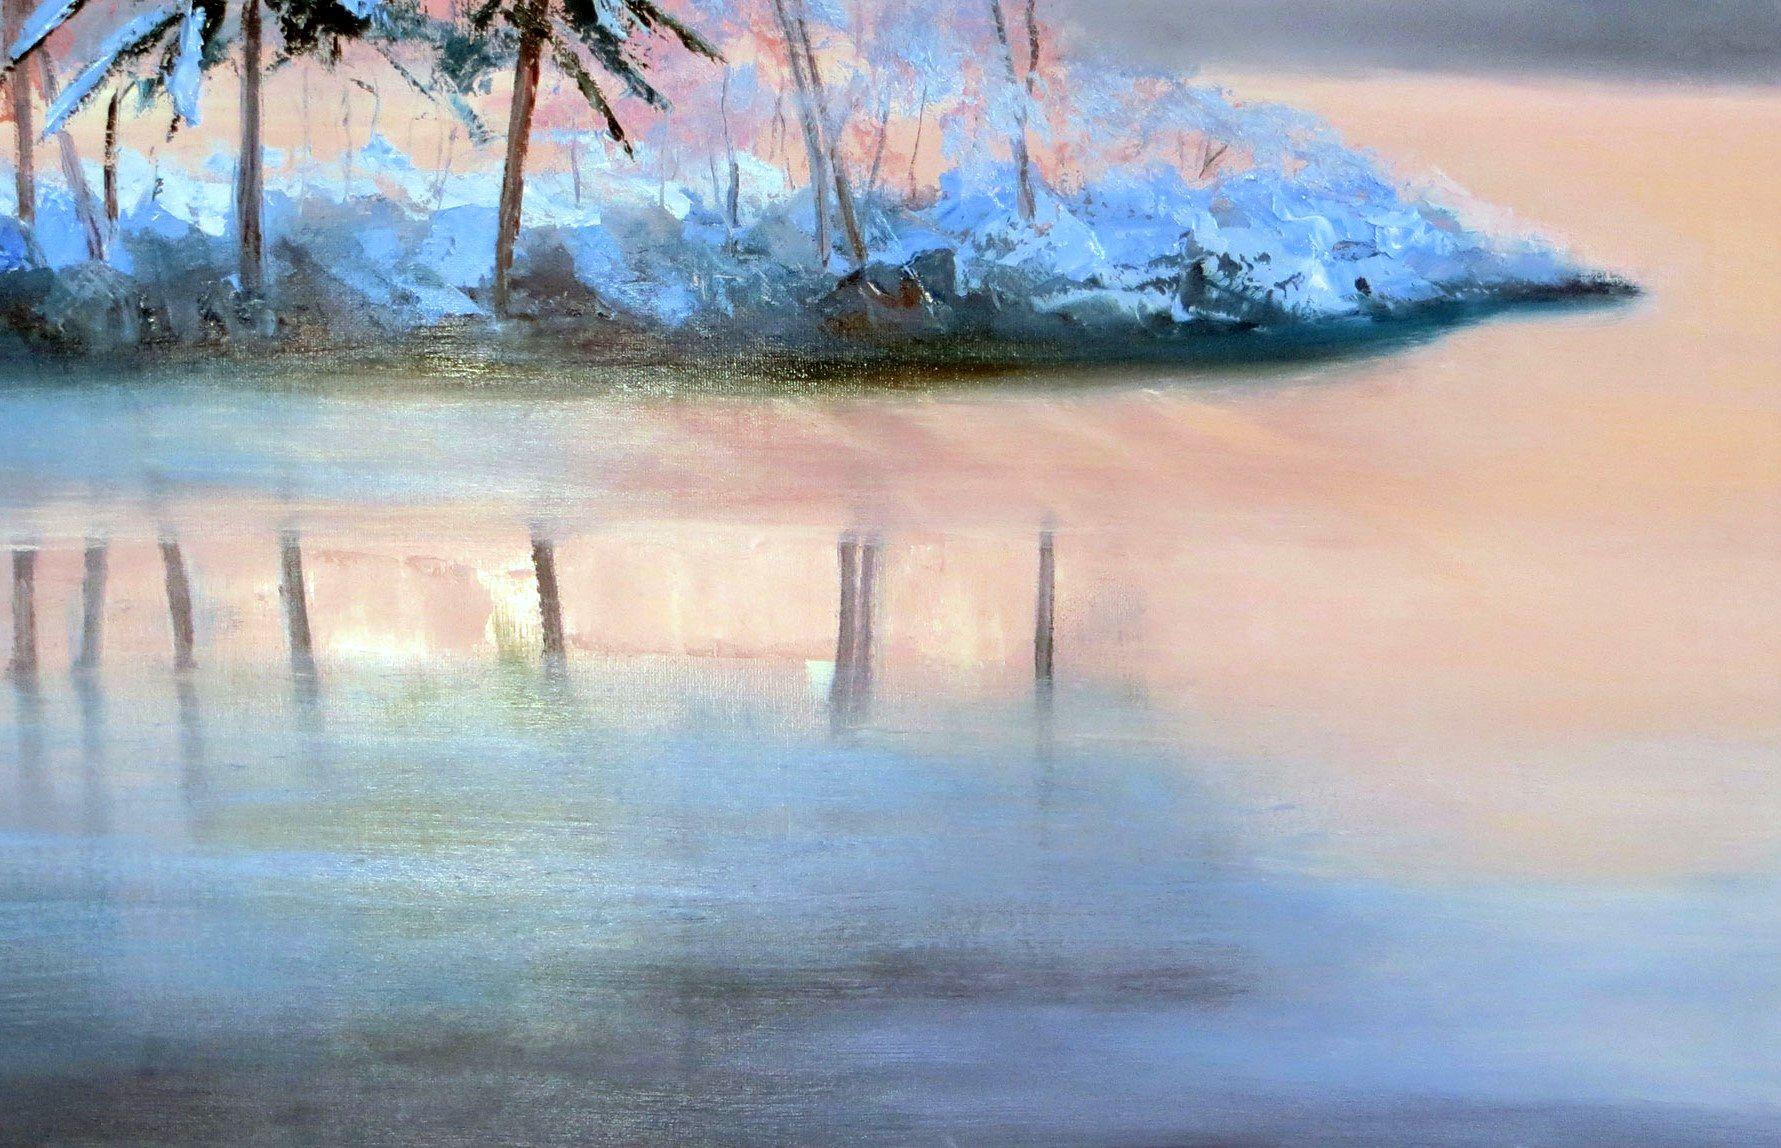 In this piece, I sought to capture the serene stillness of winter, with oil paints delicately layered to create a landscape that invites reflection. The gentle pinks and cool blues mingle with a silvery glow, evoking the quiet beauty of a chilly